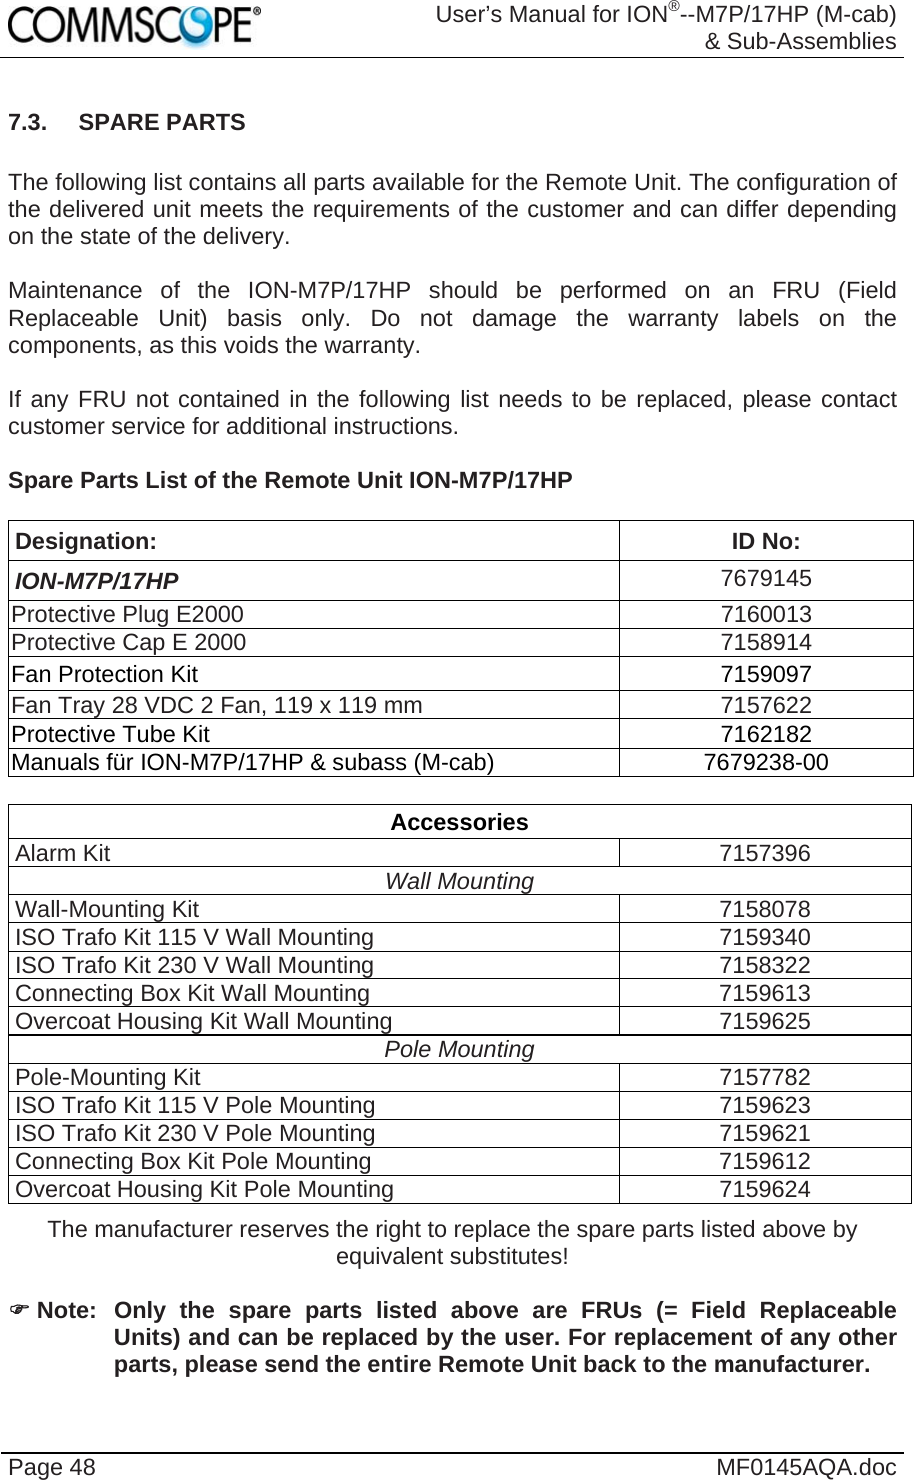  User’s Manual for ION®--M7P/17HP (M-cab) &amp; Sub-Assemblies Page 48  MF0145AQA.doc 7.3. SPARE PARTS  The following list contains all parts available for the Remote Unit. The configuration of the delivered unit meets the requirements of the customer and can differ depending on the state of the delivery.  Maintenance of the ION-M7P/17HP should be performed on an FRU (Field Replaceable Unit) basis only. Do not damage the warranty labels on the components, as this voids the warranty.   If any FRU not contained in the following list needs to be replaced, please contact customer service for additional instructions.  Spare Parts List of the Remote Unit ION-M7P/17HP  Designation: ID No: ION-M7P/17HP  7679145 Protective Plug E2000  7160013 Protective Cap E 2000  7158914 Fan Protection Kit  7159097 Fan Tray 28 VDC 2 Fan, 119 x 119 mm  7157622 Protective Tube Kit  7162182 Manuals für ION-M7P/17HP &amp; subass (M-cab)  7679238-00  Accessories Alarm Kit  7157396 Wall Mounting Wall-Mounting Kit  7158078 ISO Trafo Kit 115 V Wall Mounting  7159340 ISO Trafo Kit 230 V Wall Mounting  7158322 Connecting Box Kit Wall Mounting  7159613 Overcoat Housing Kit Wall Mounting  7159625 Pole Mounting  Pole-Mounting Kit  7157782 ISO Trafo Kit 115 V Pole Mounting  7159623 ISO Trafo Kit 230 V Pole Mounting  7159621 Connecting Box Kit Pole Mounting  7159612 Overcoat Housing Kit Pole Mounting  7159624 The manufacturer reserves the right to replace the spare parts listed above by equivalent substitutes!   Note: Only the spare parts listed above are FRUs (= Field Replaceable Units) and can be replaced by the user. For replacement of any other parts, please send the entire Remote Unit back to the manufacturer. 